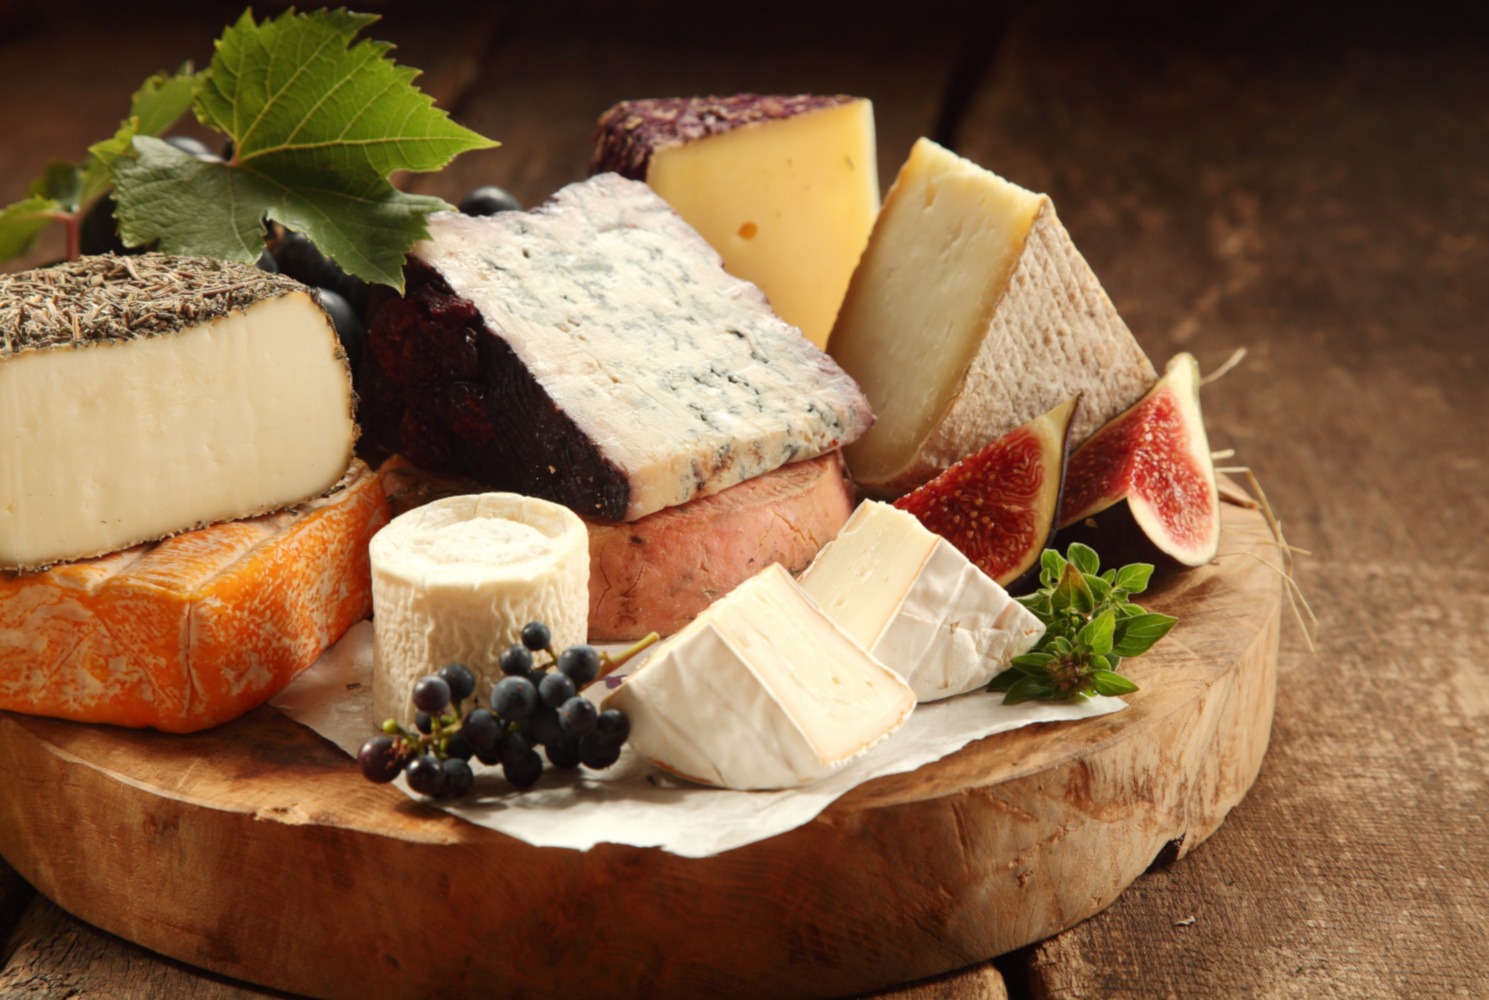 Delicious gourmet cheese platter with a wide assortment of soft and semi-hard cheeses served with sliced sweet fresh figs and grapes on a rustic wooden table with background shadow